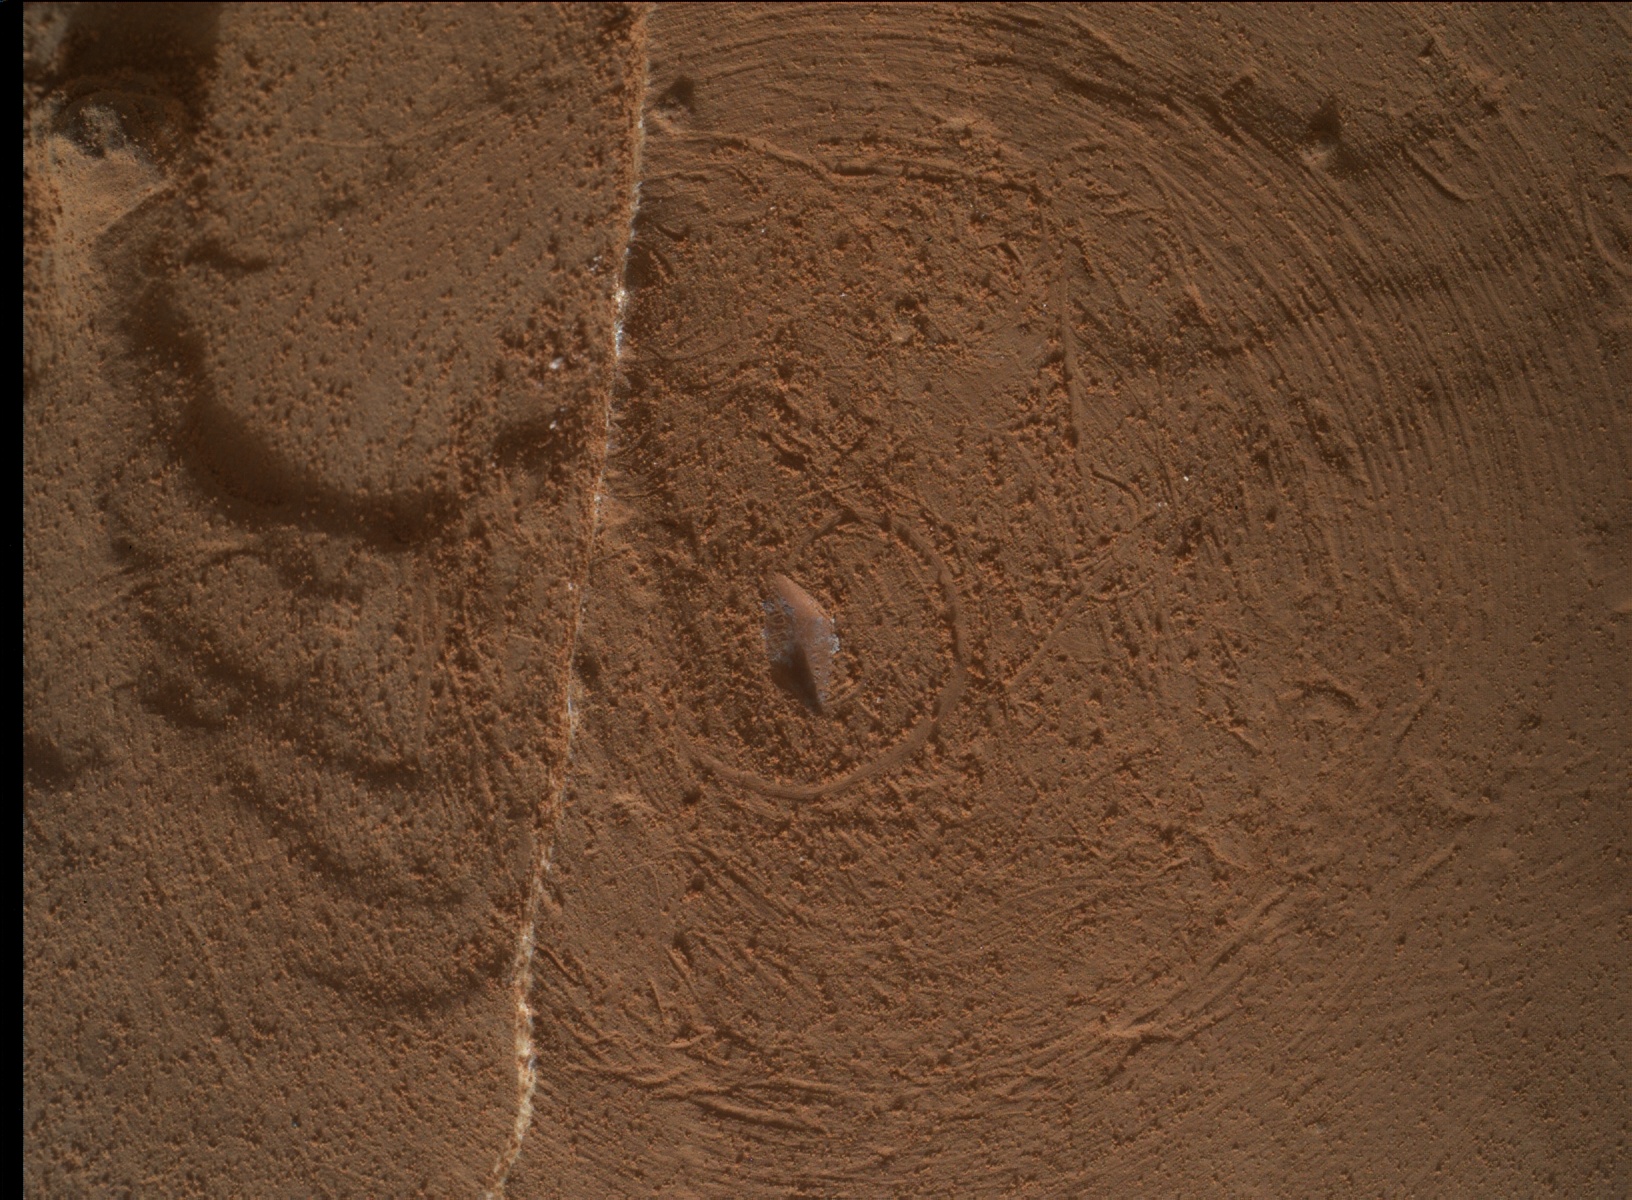 Nasa's Mars rover Curiosity acquired this image using its Mars Hand Lens Imager (MAHLI) on Sol 2055